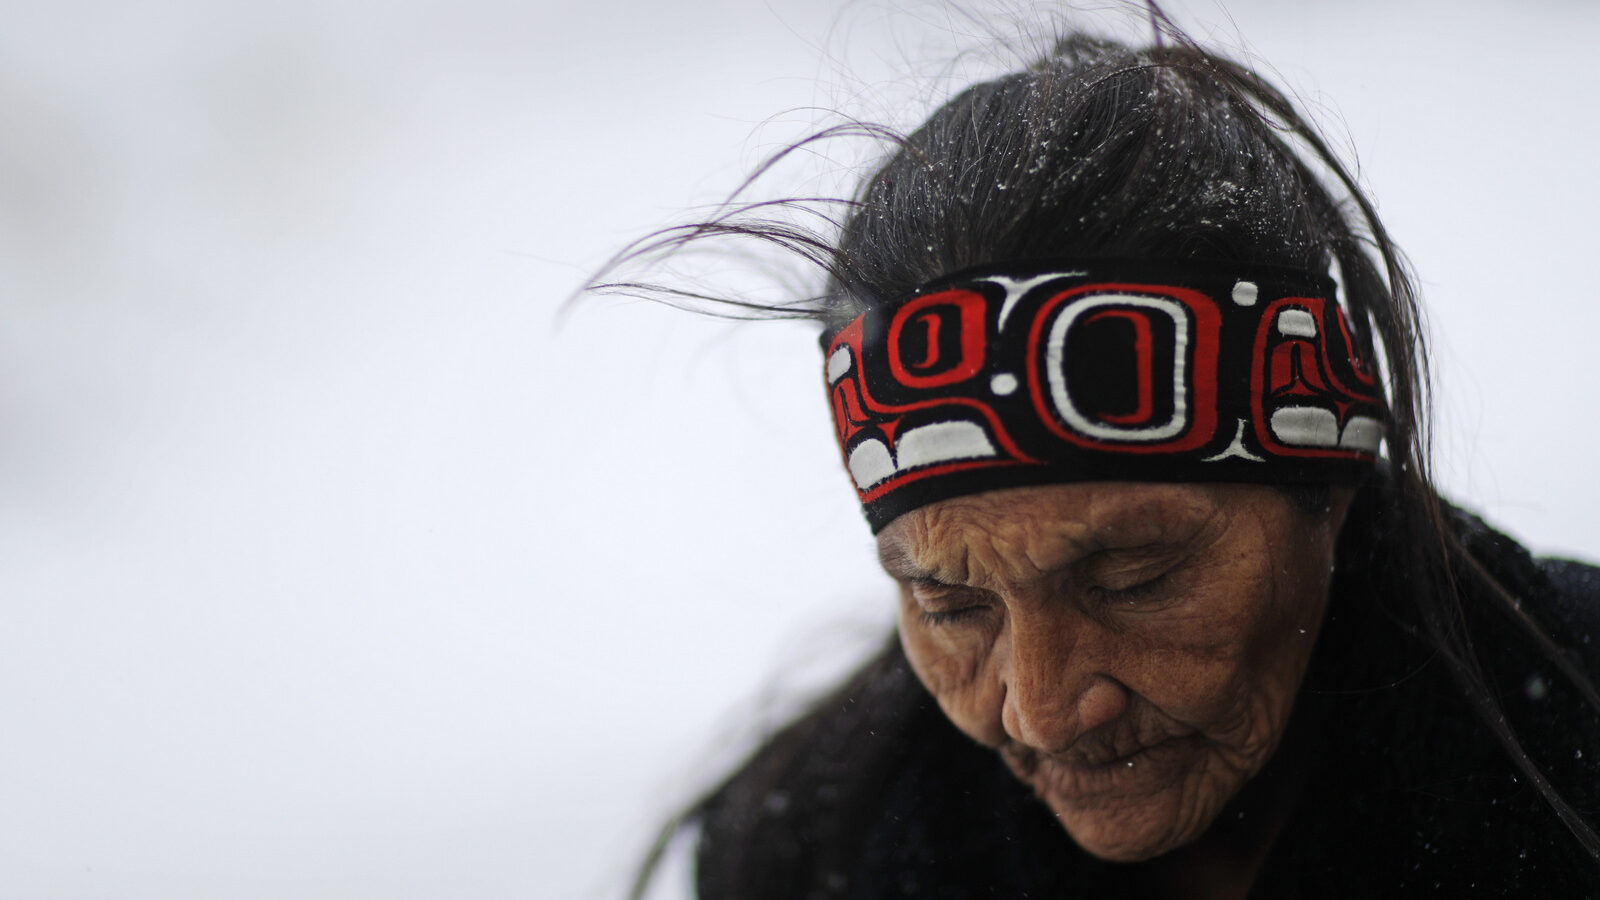 Grandma Redfeather of the Sioux Native American tribe walks in the snow to get water at the Oceti Sakowin camp where people have gathered to protest the Dakota Access oil pipeline in Cannon Ball, N.D. (AP/David Goldman)